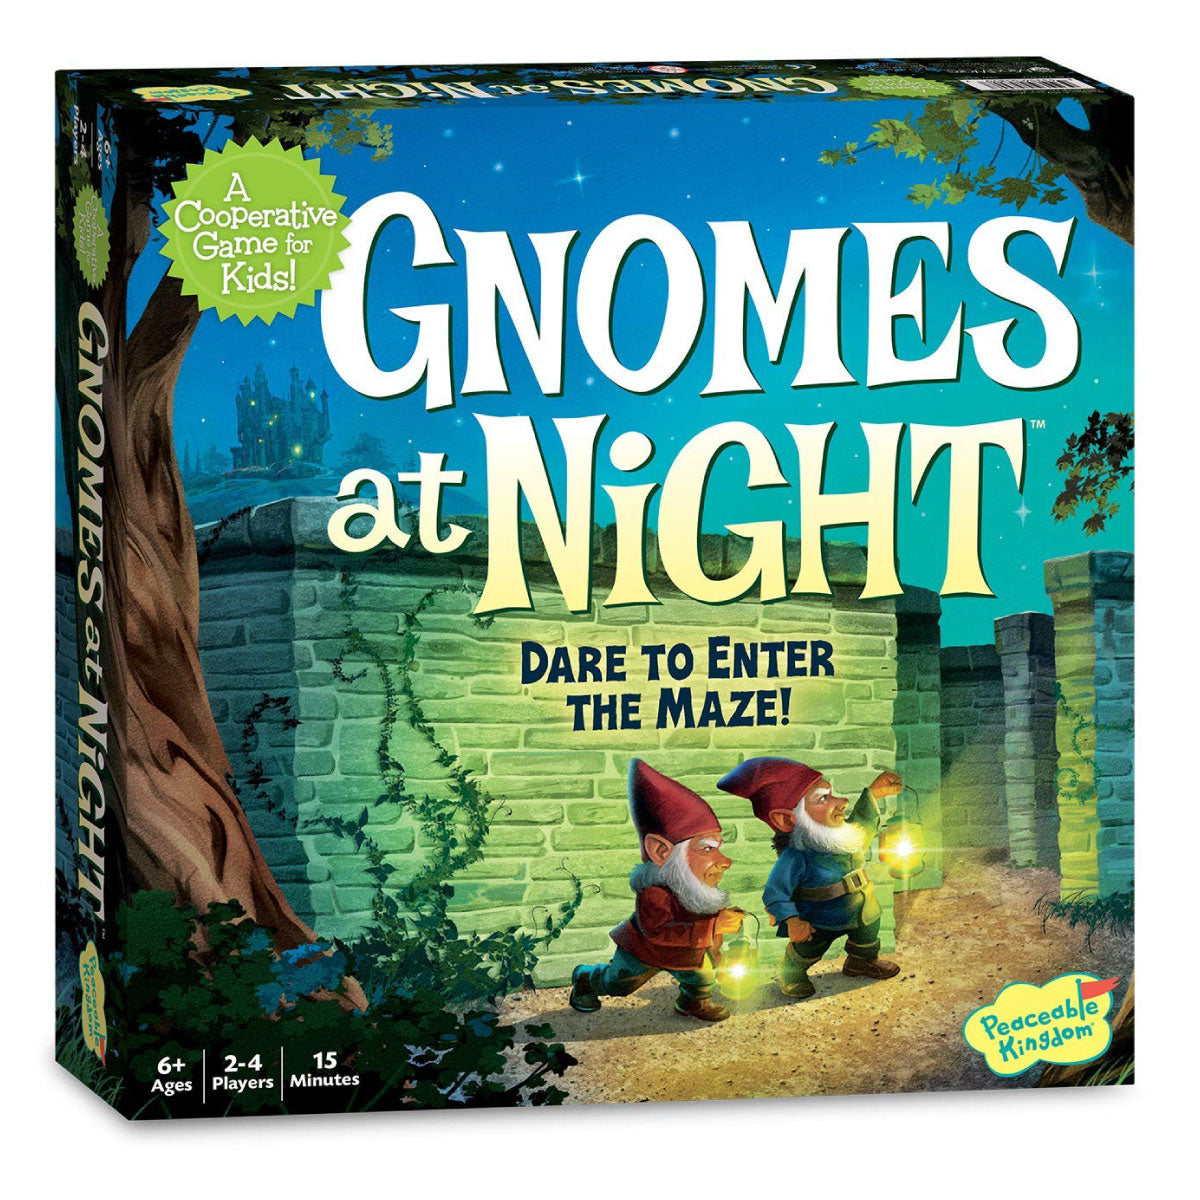 Gnomes at Night from Peaceable Kingdom